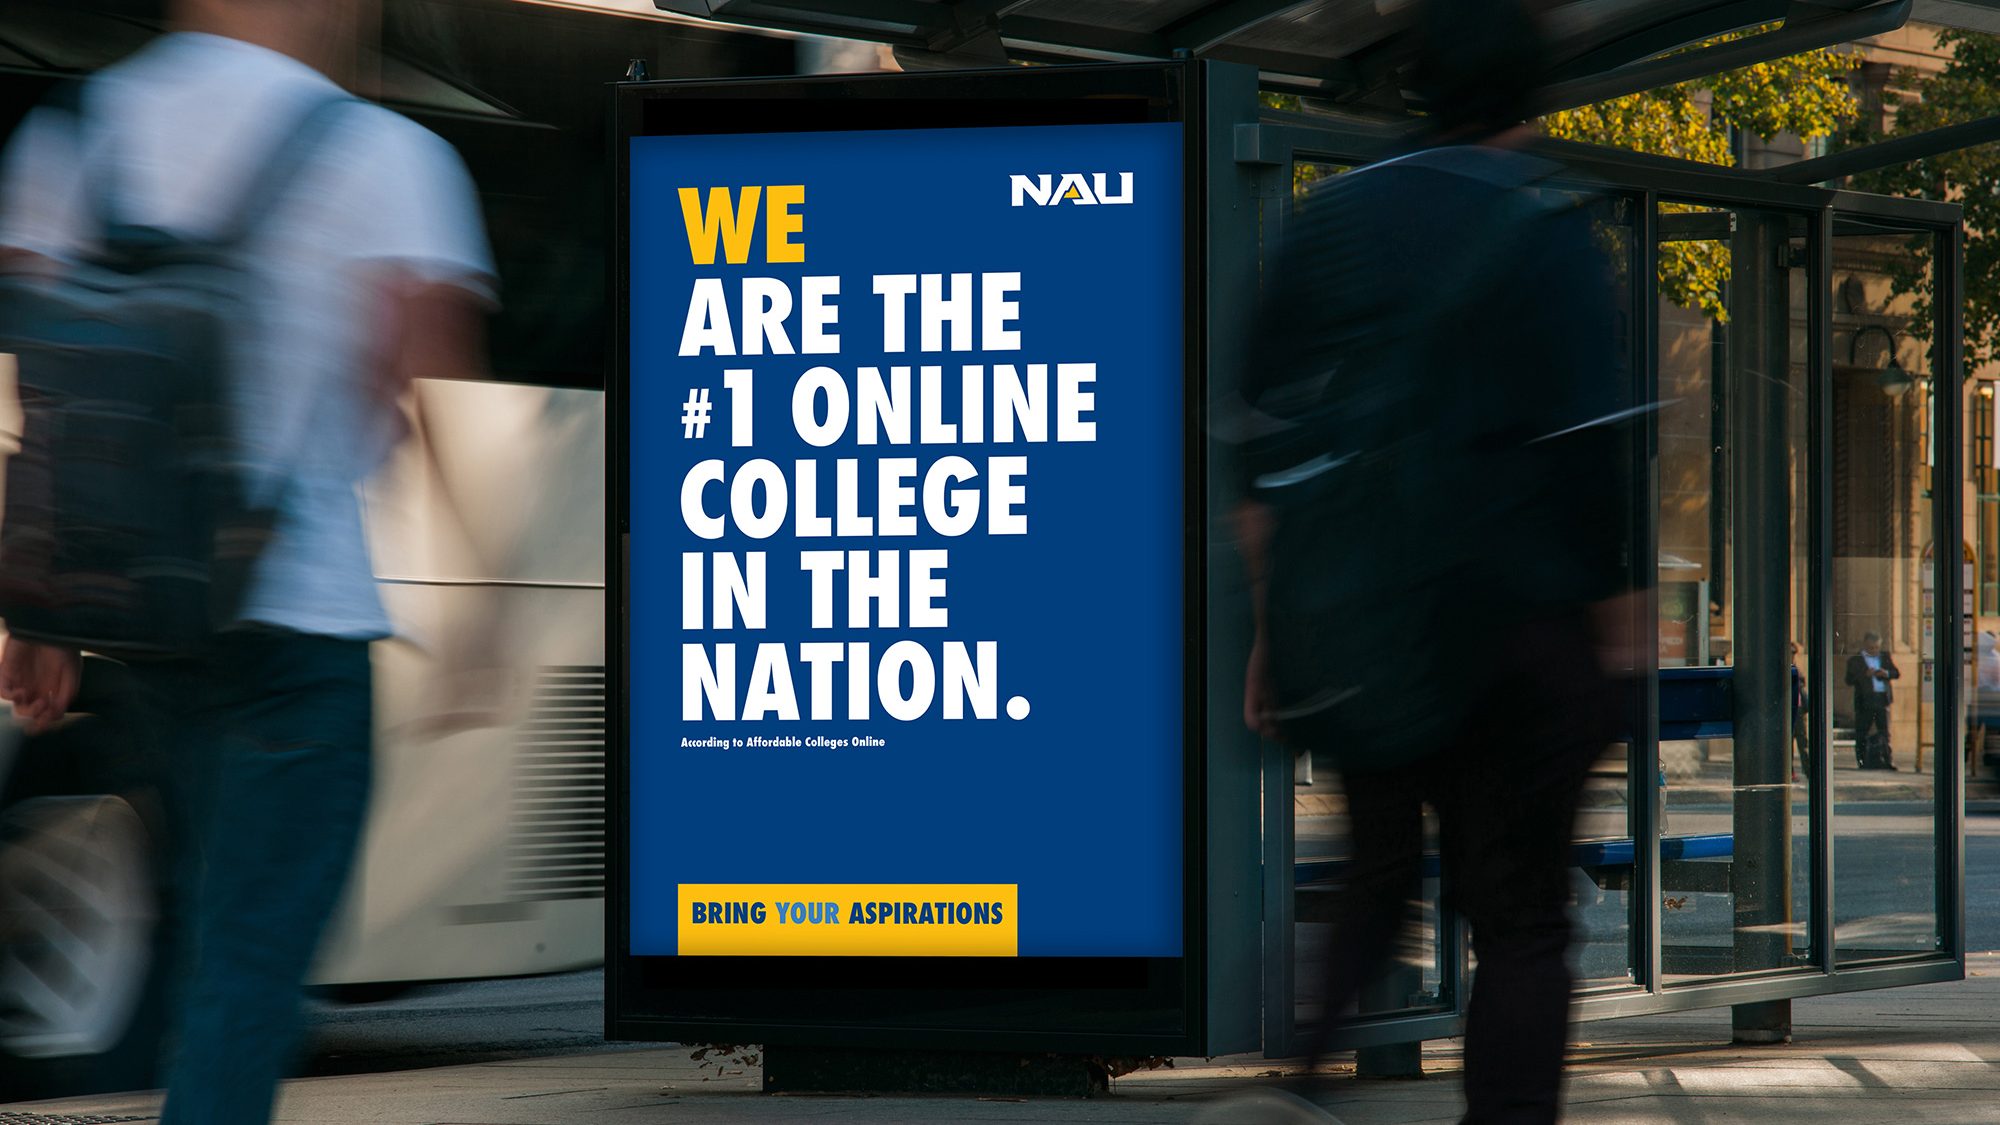 We are the number one online college in the nation.